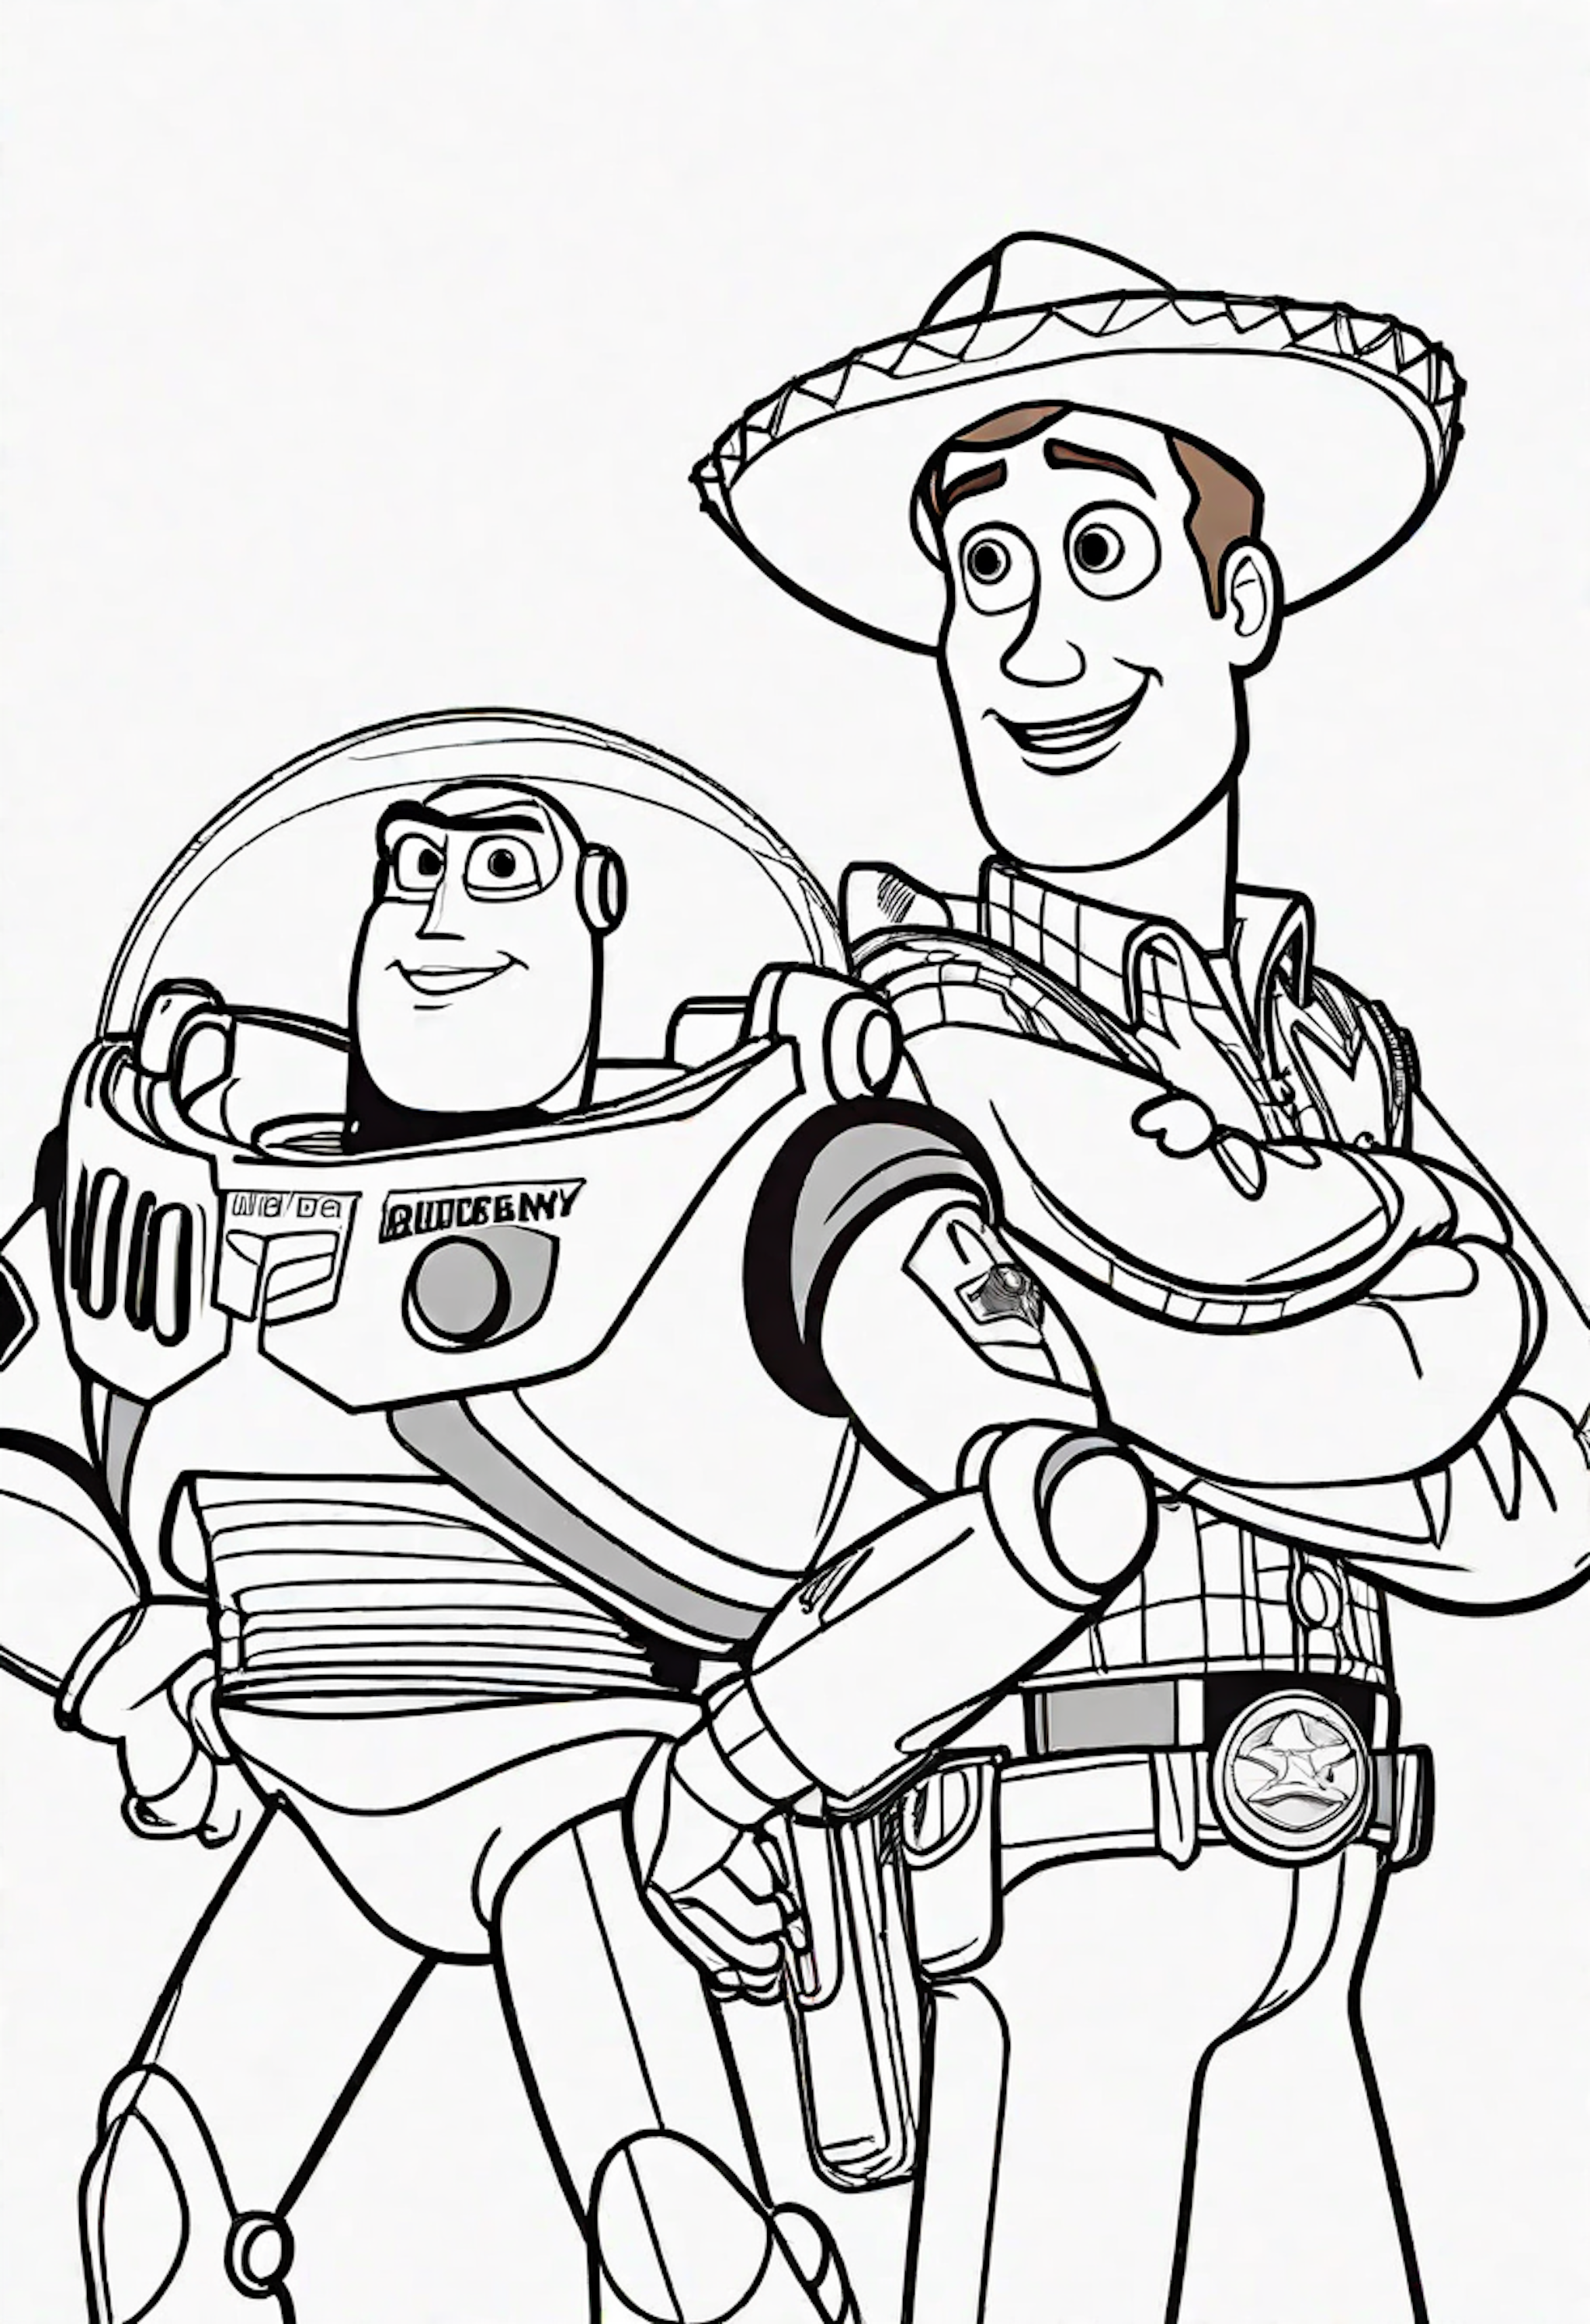 A coloring page for 6 Buzz Lightyear coloring pages